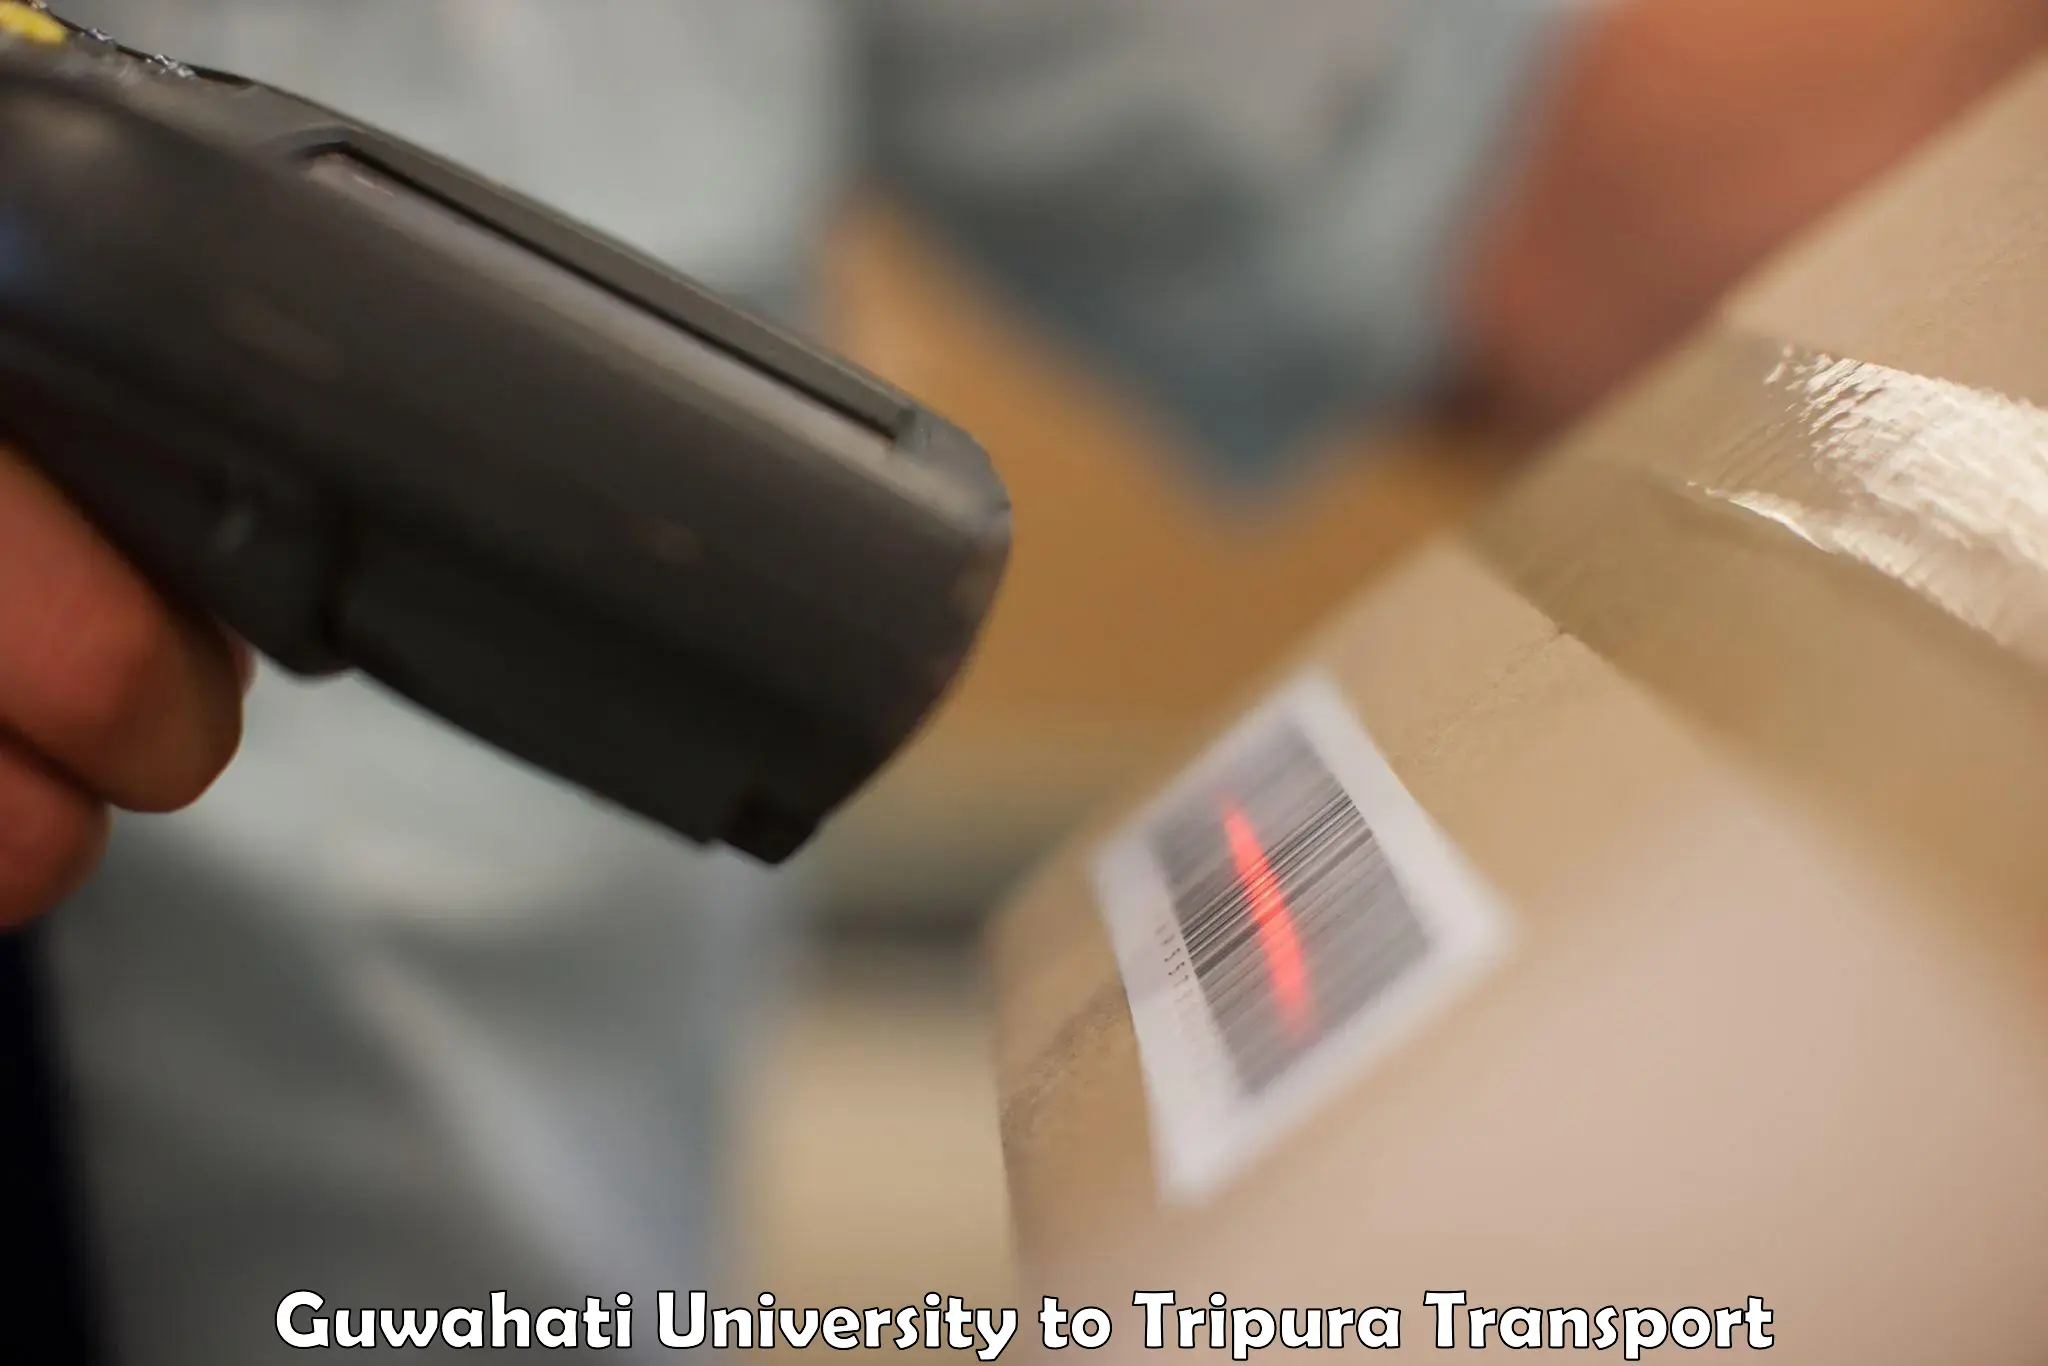 Shipping services in Guwahati University to Udaipur Tripura